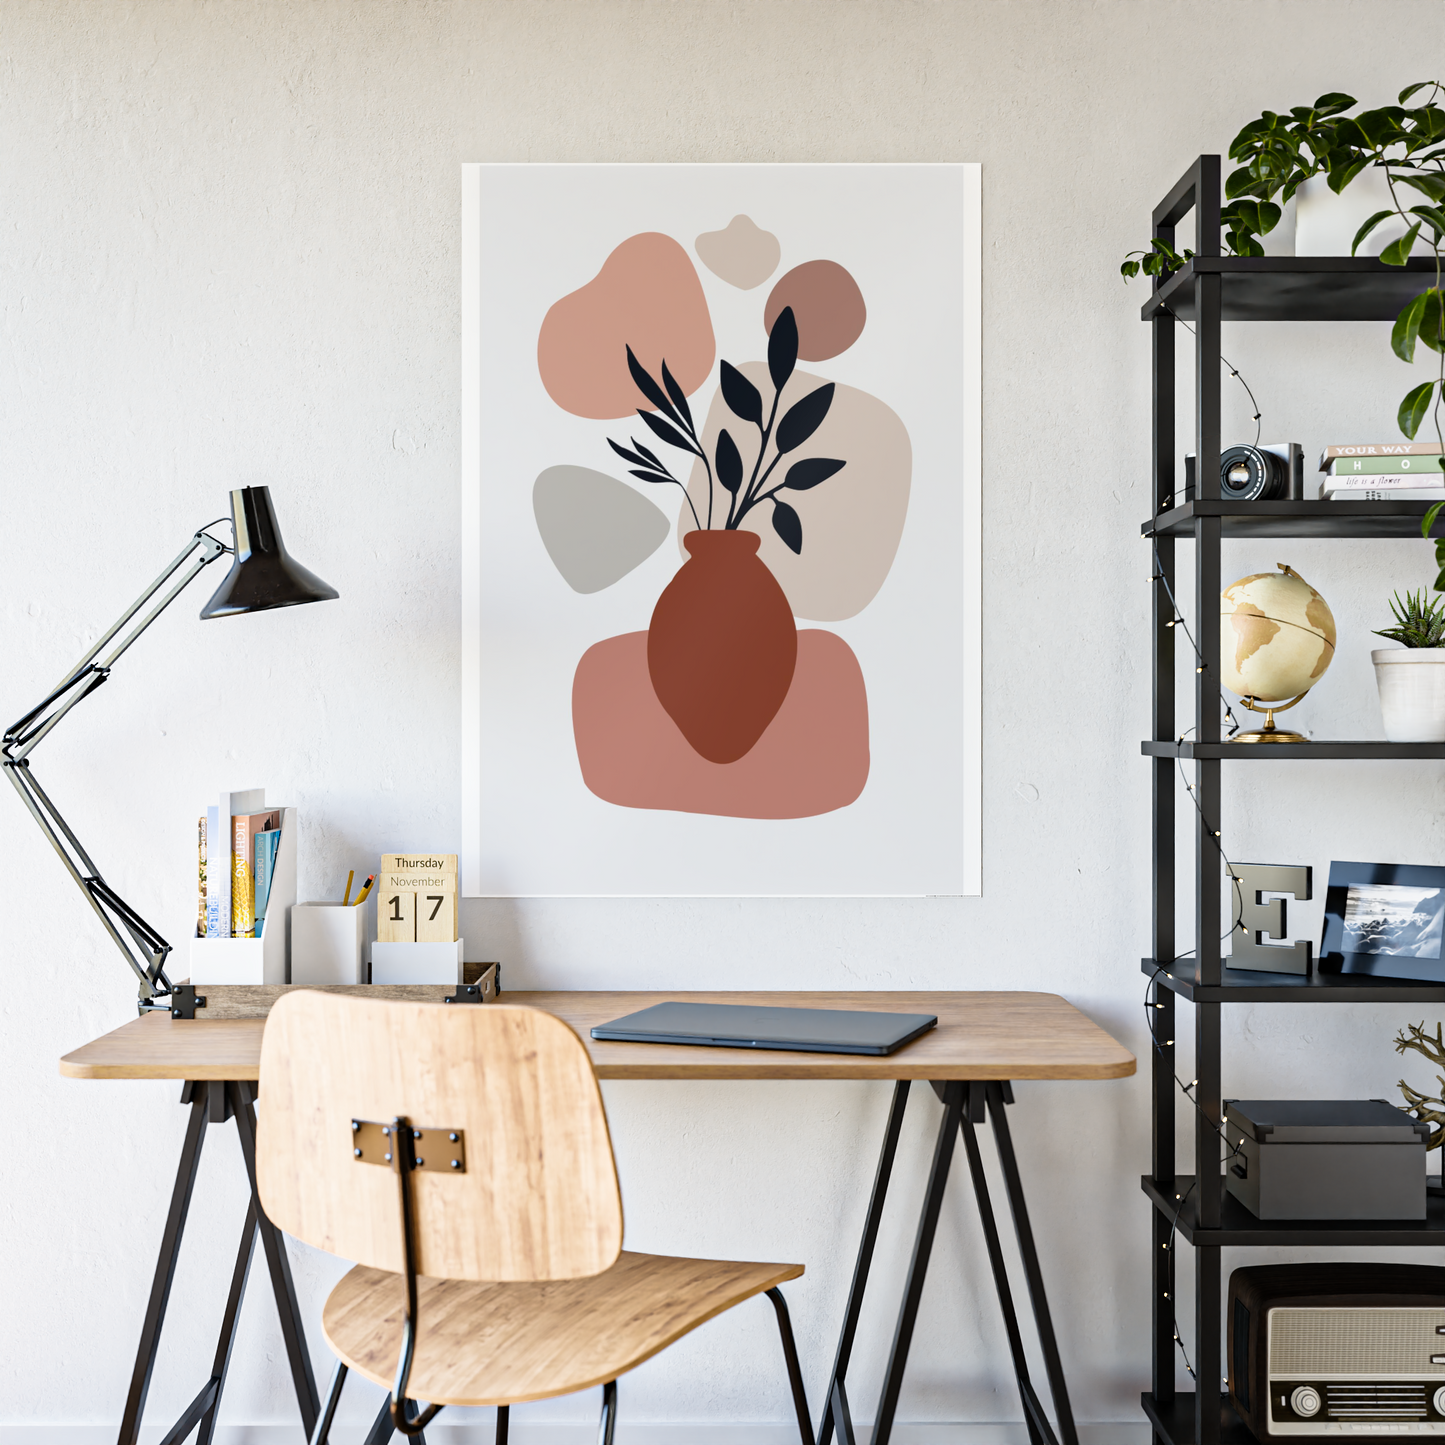 Boldly Minimal: Abstract Posters on Natural Canvas for a Statement Wall